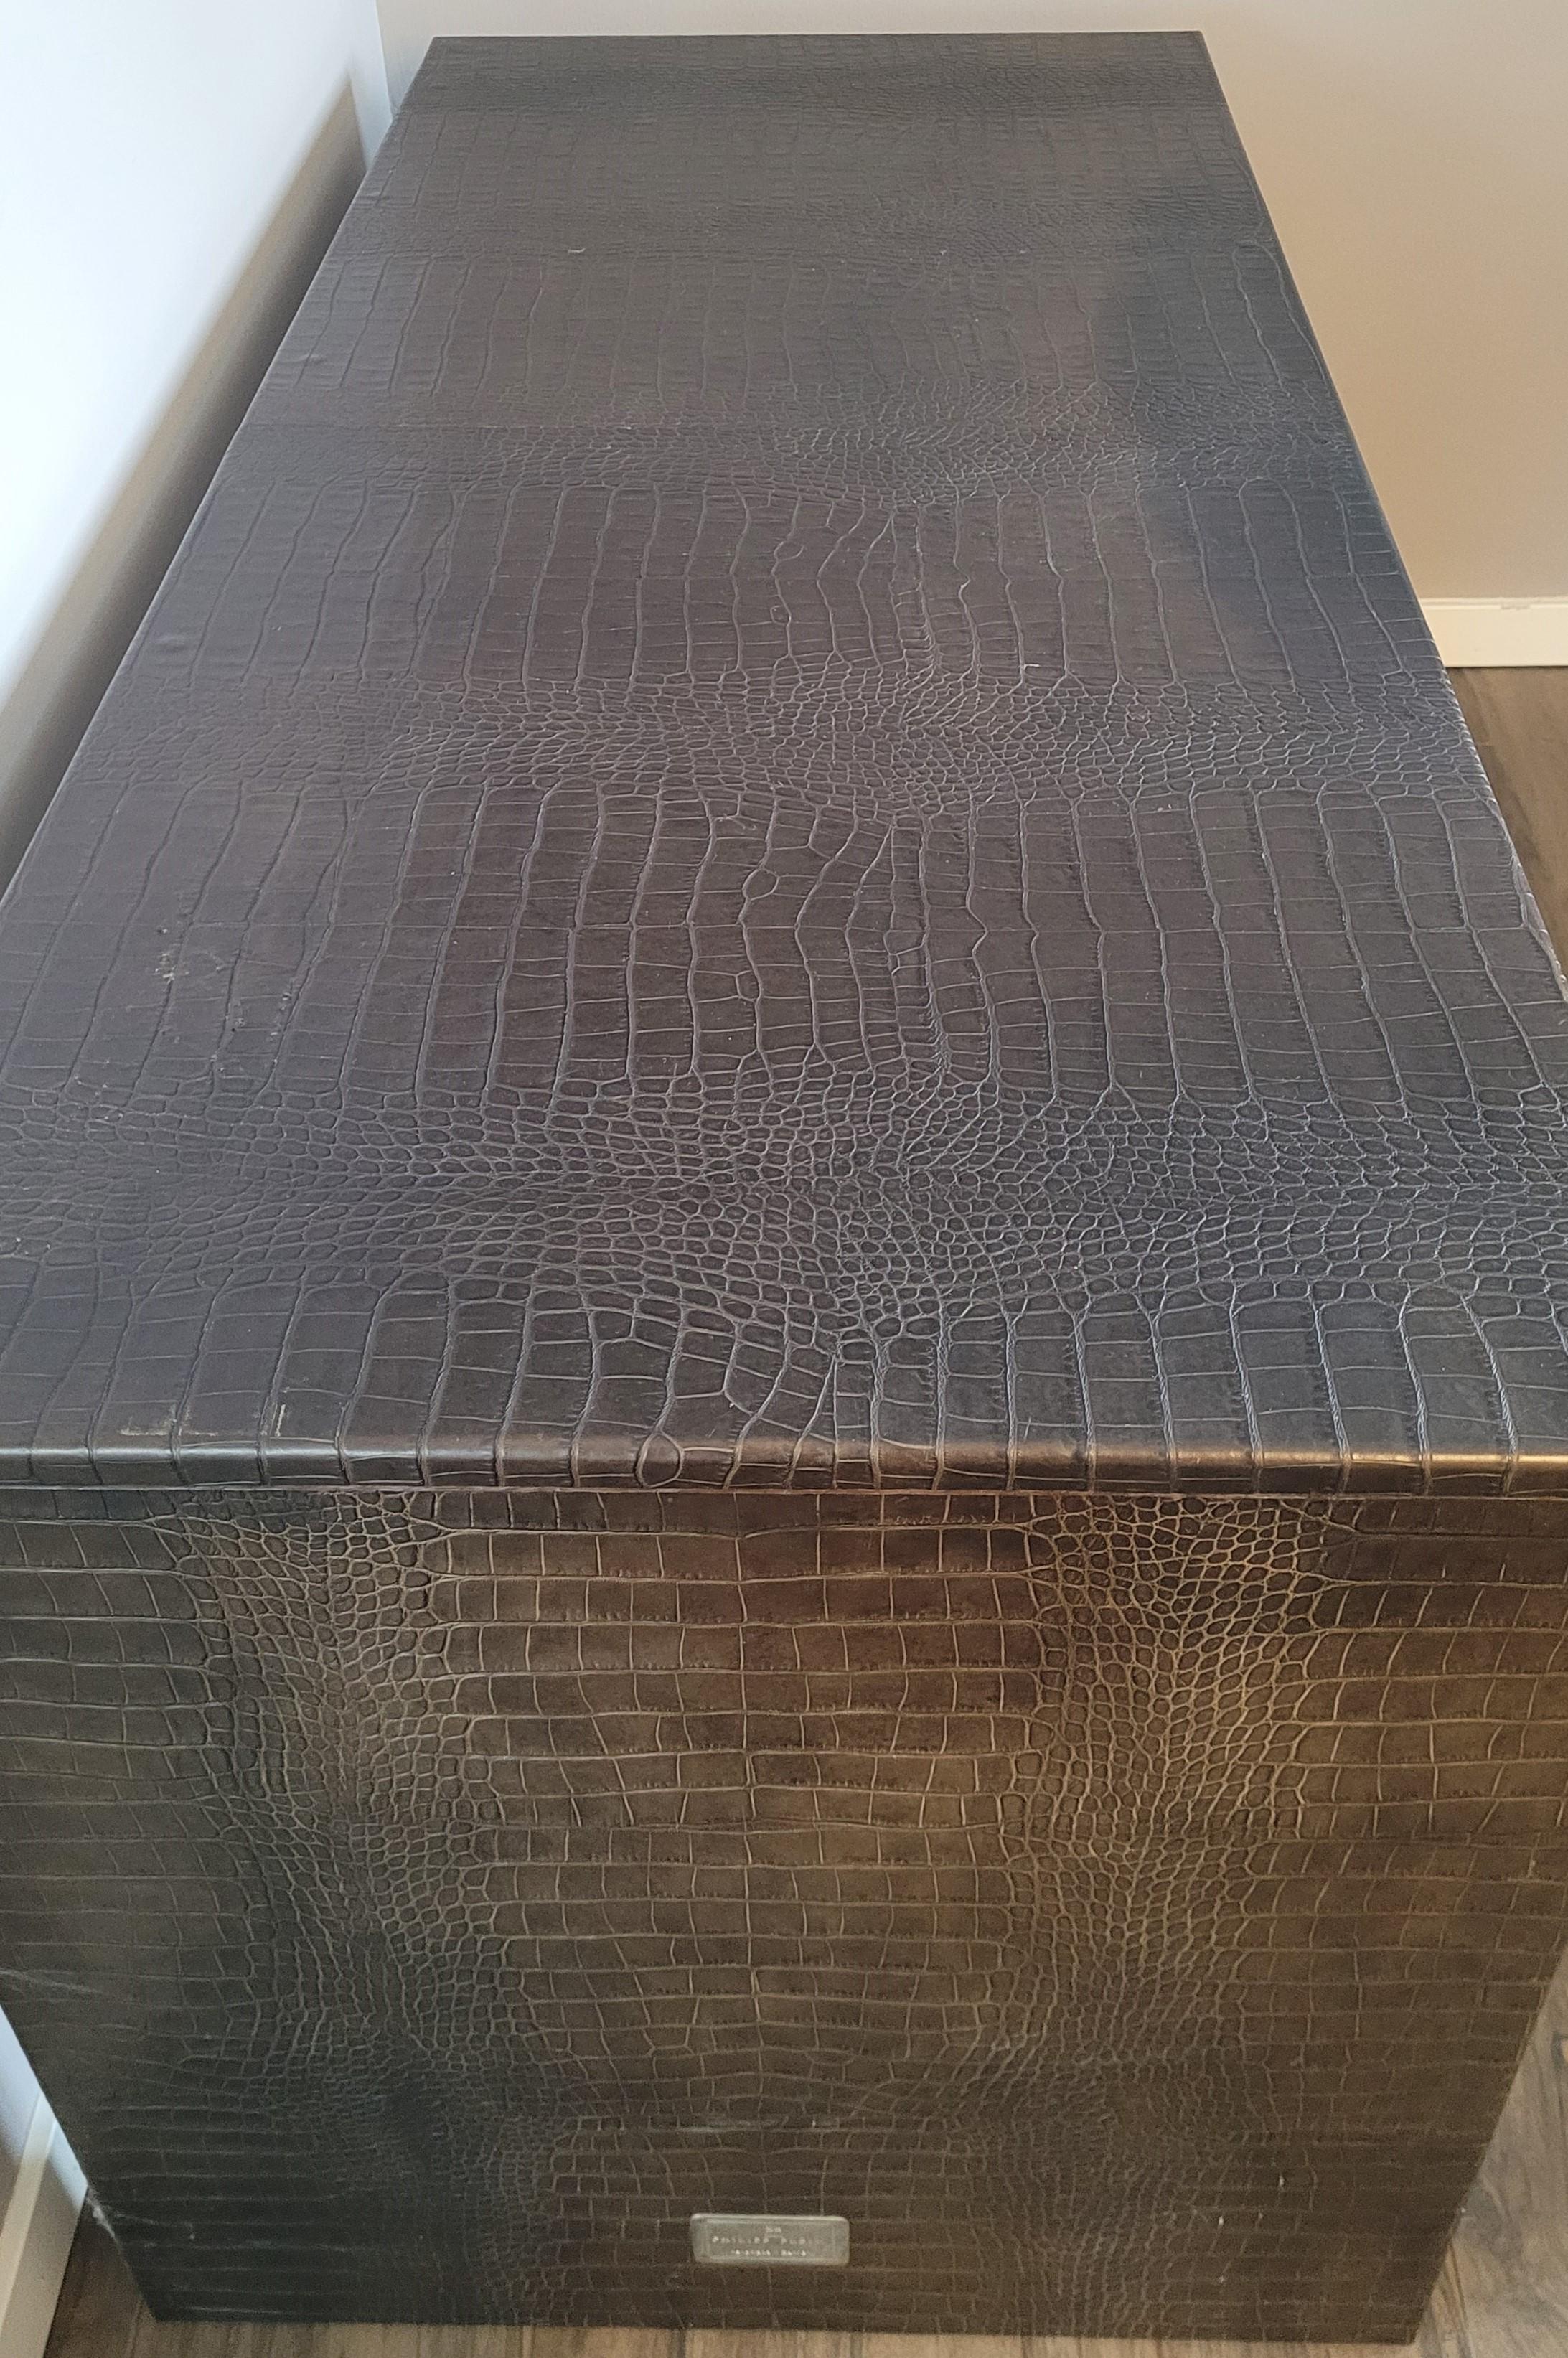  Philipp Plein office  black table in split leather with a crocodile skin effect In Good Condition For Sale In Valladolid, ES